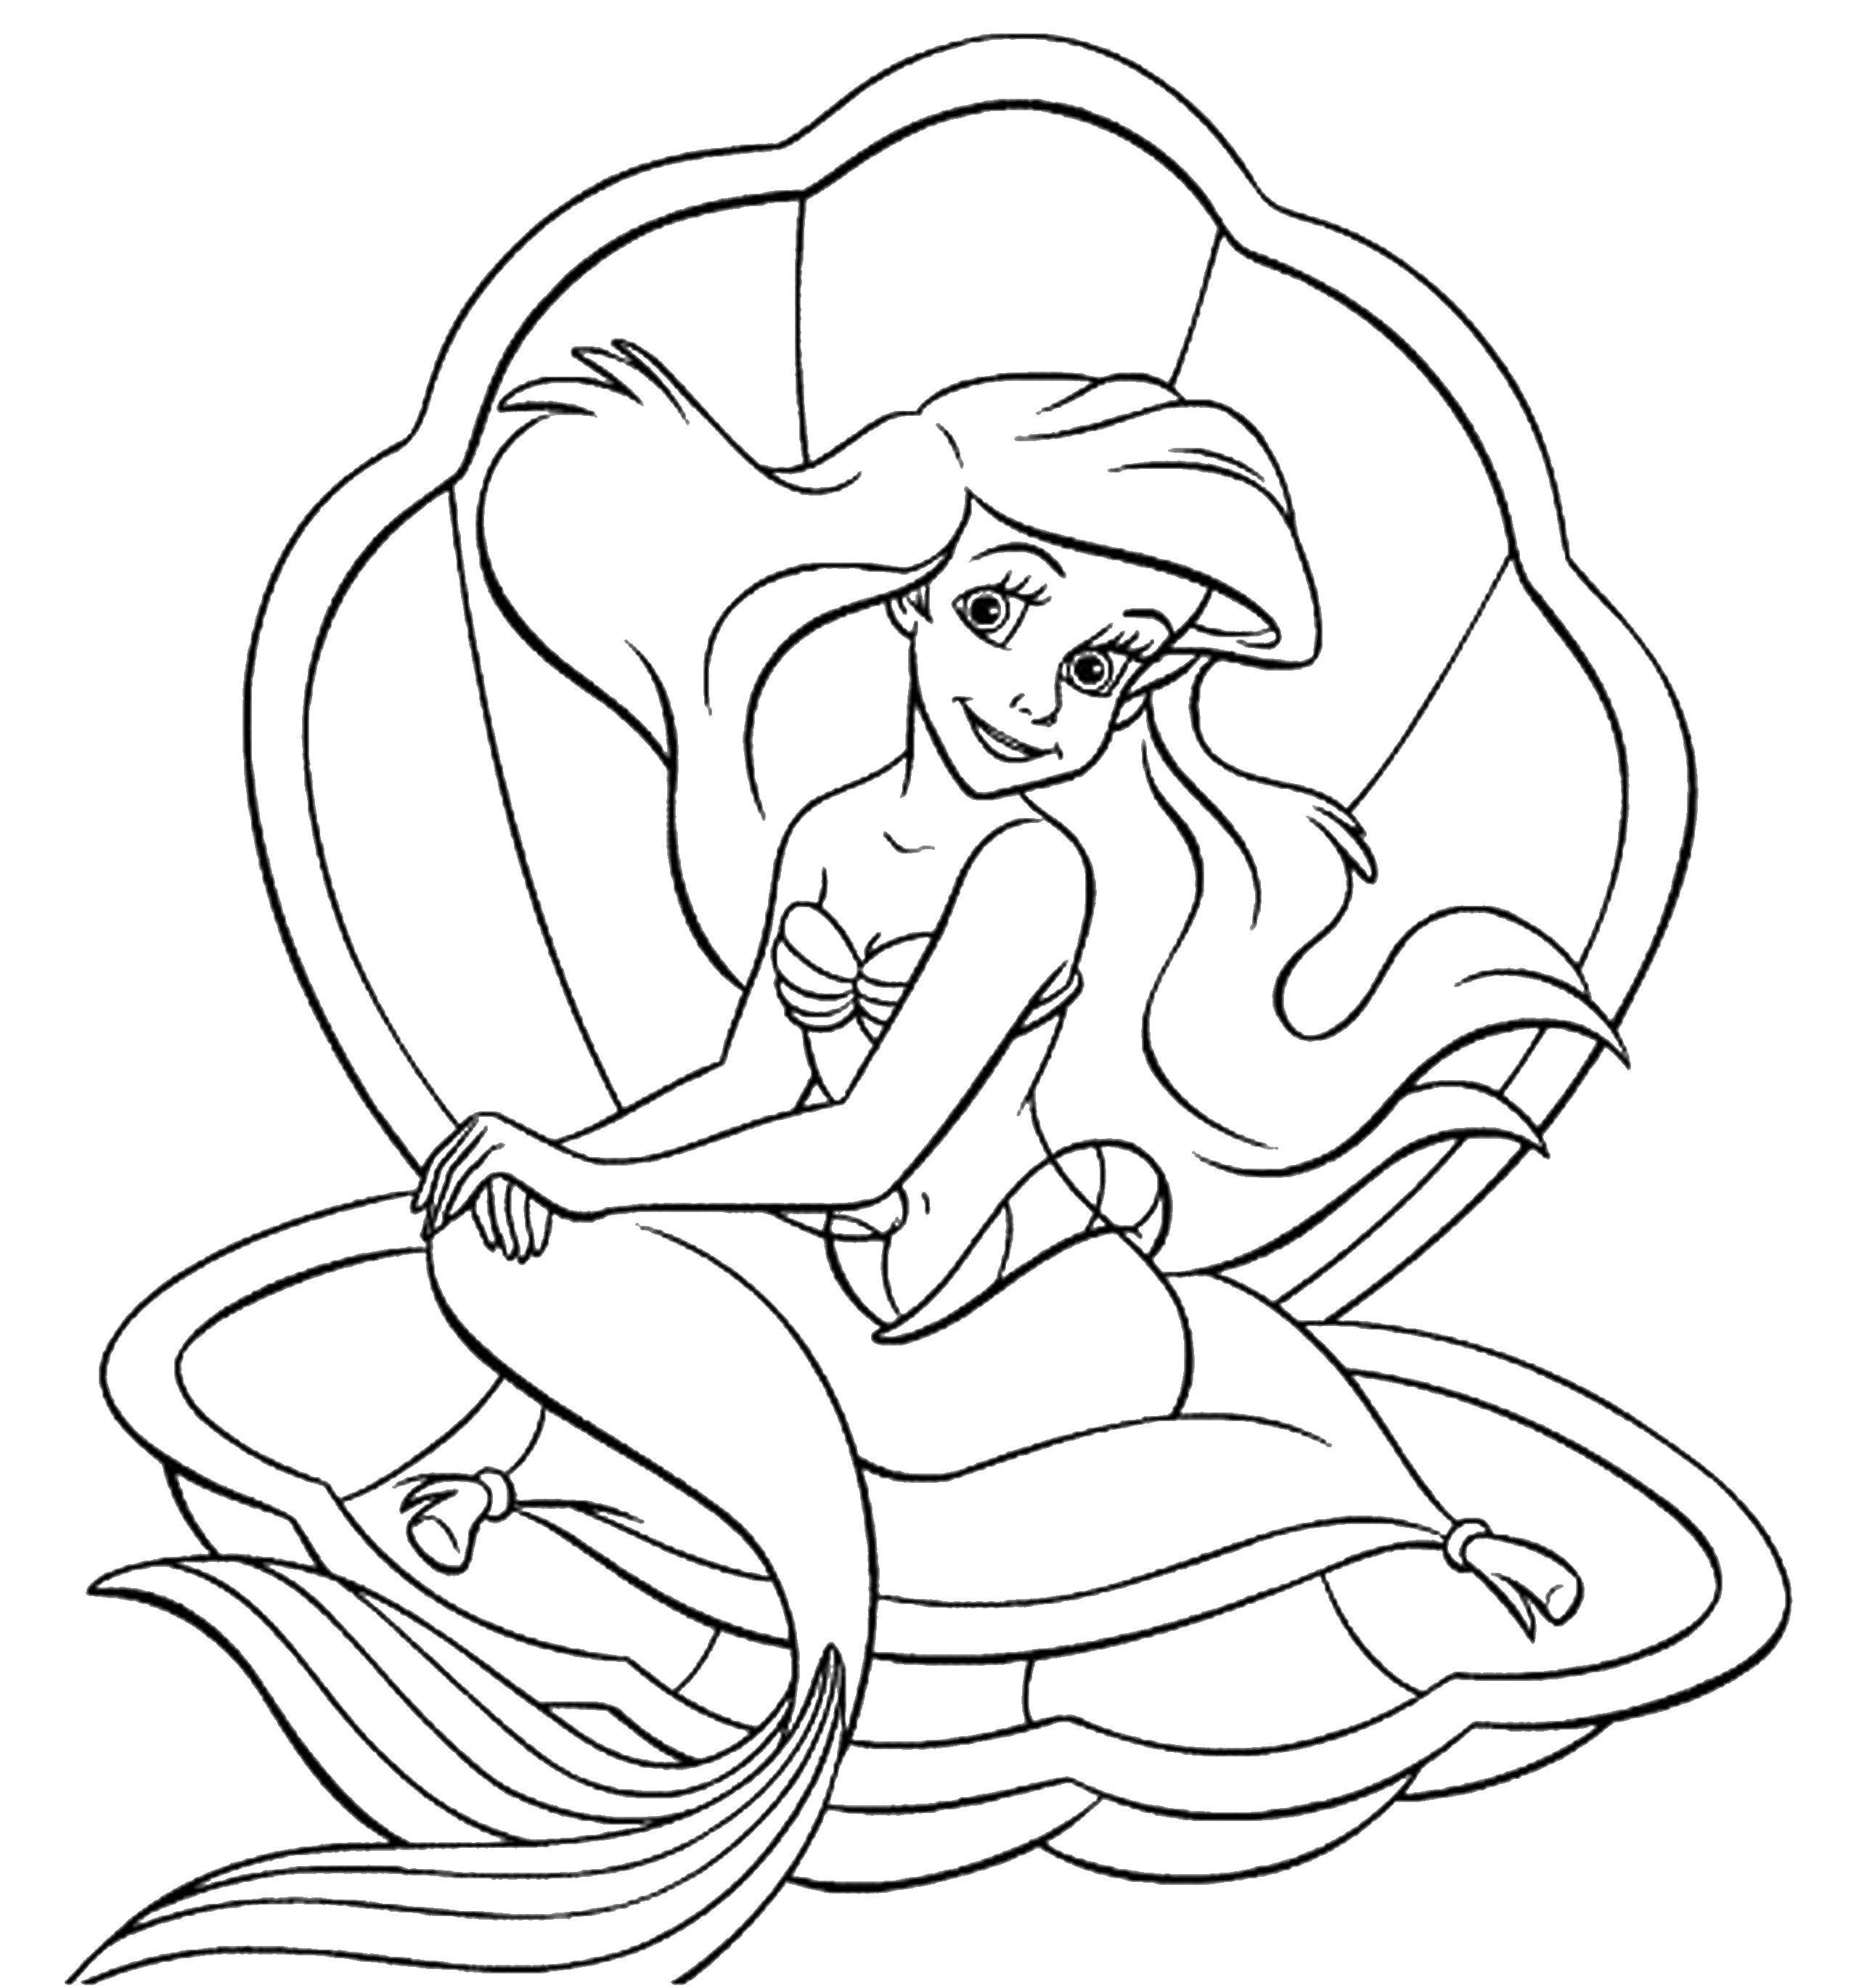 Coloring Ariel in the pearl. Category The little mermaid. Tags:  Disney, the little mermaid, Ariel.